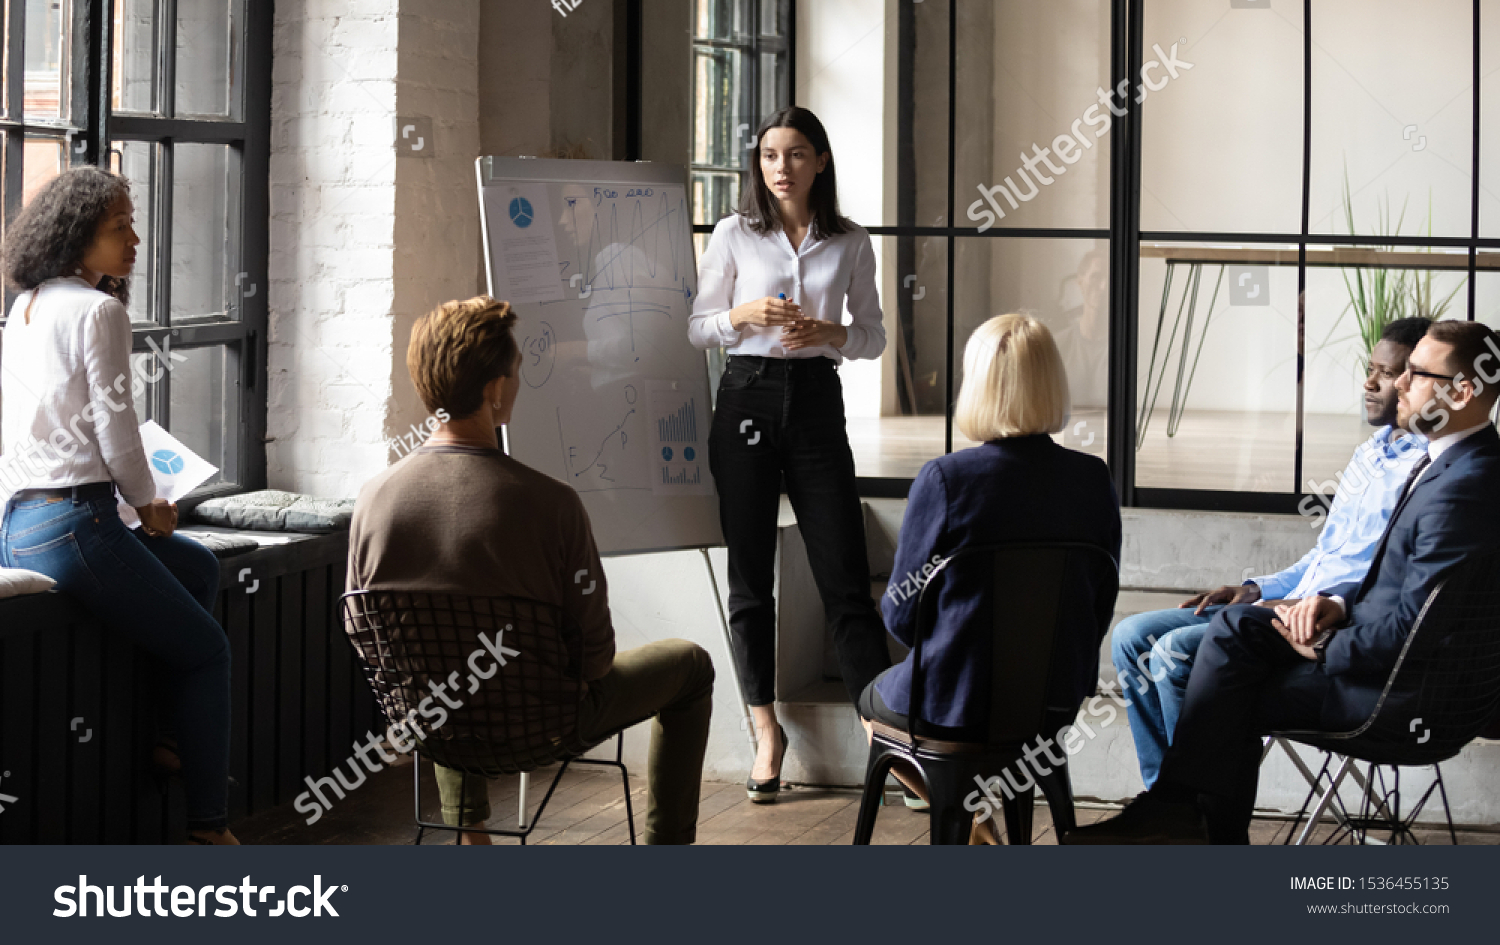 Confident lady business trainer coach leader give flip chart presentation consulting clients teaching employees training team people speaking explaining strategy at marketing workshop concept #1536455135